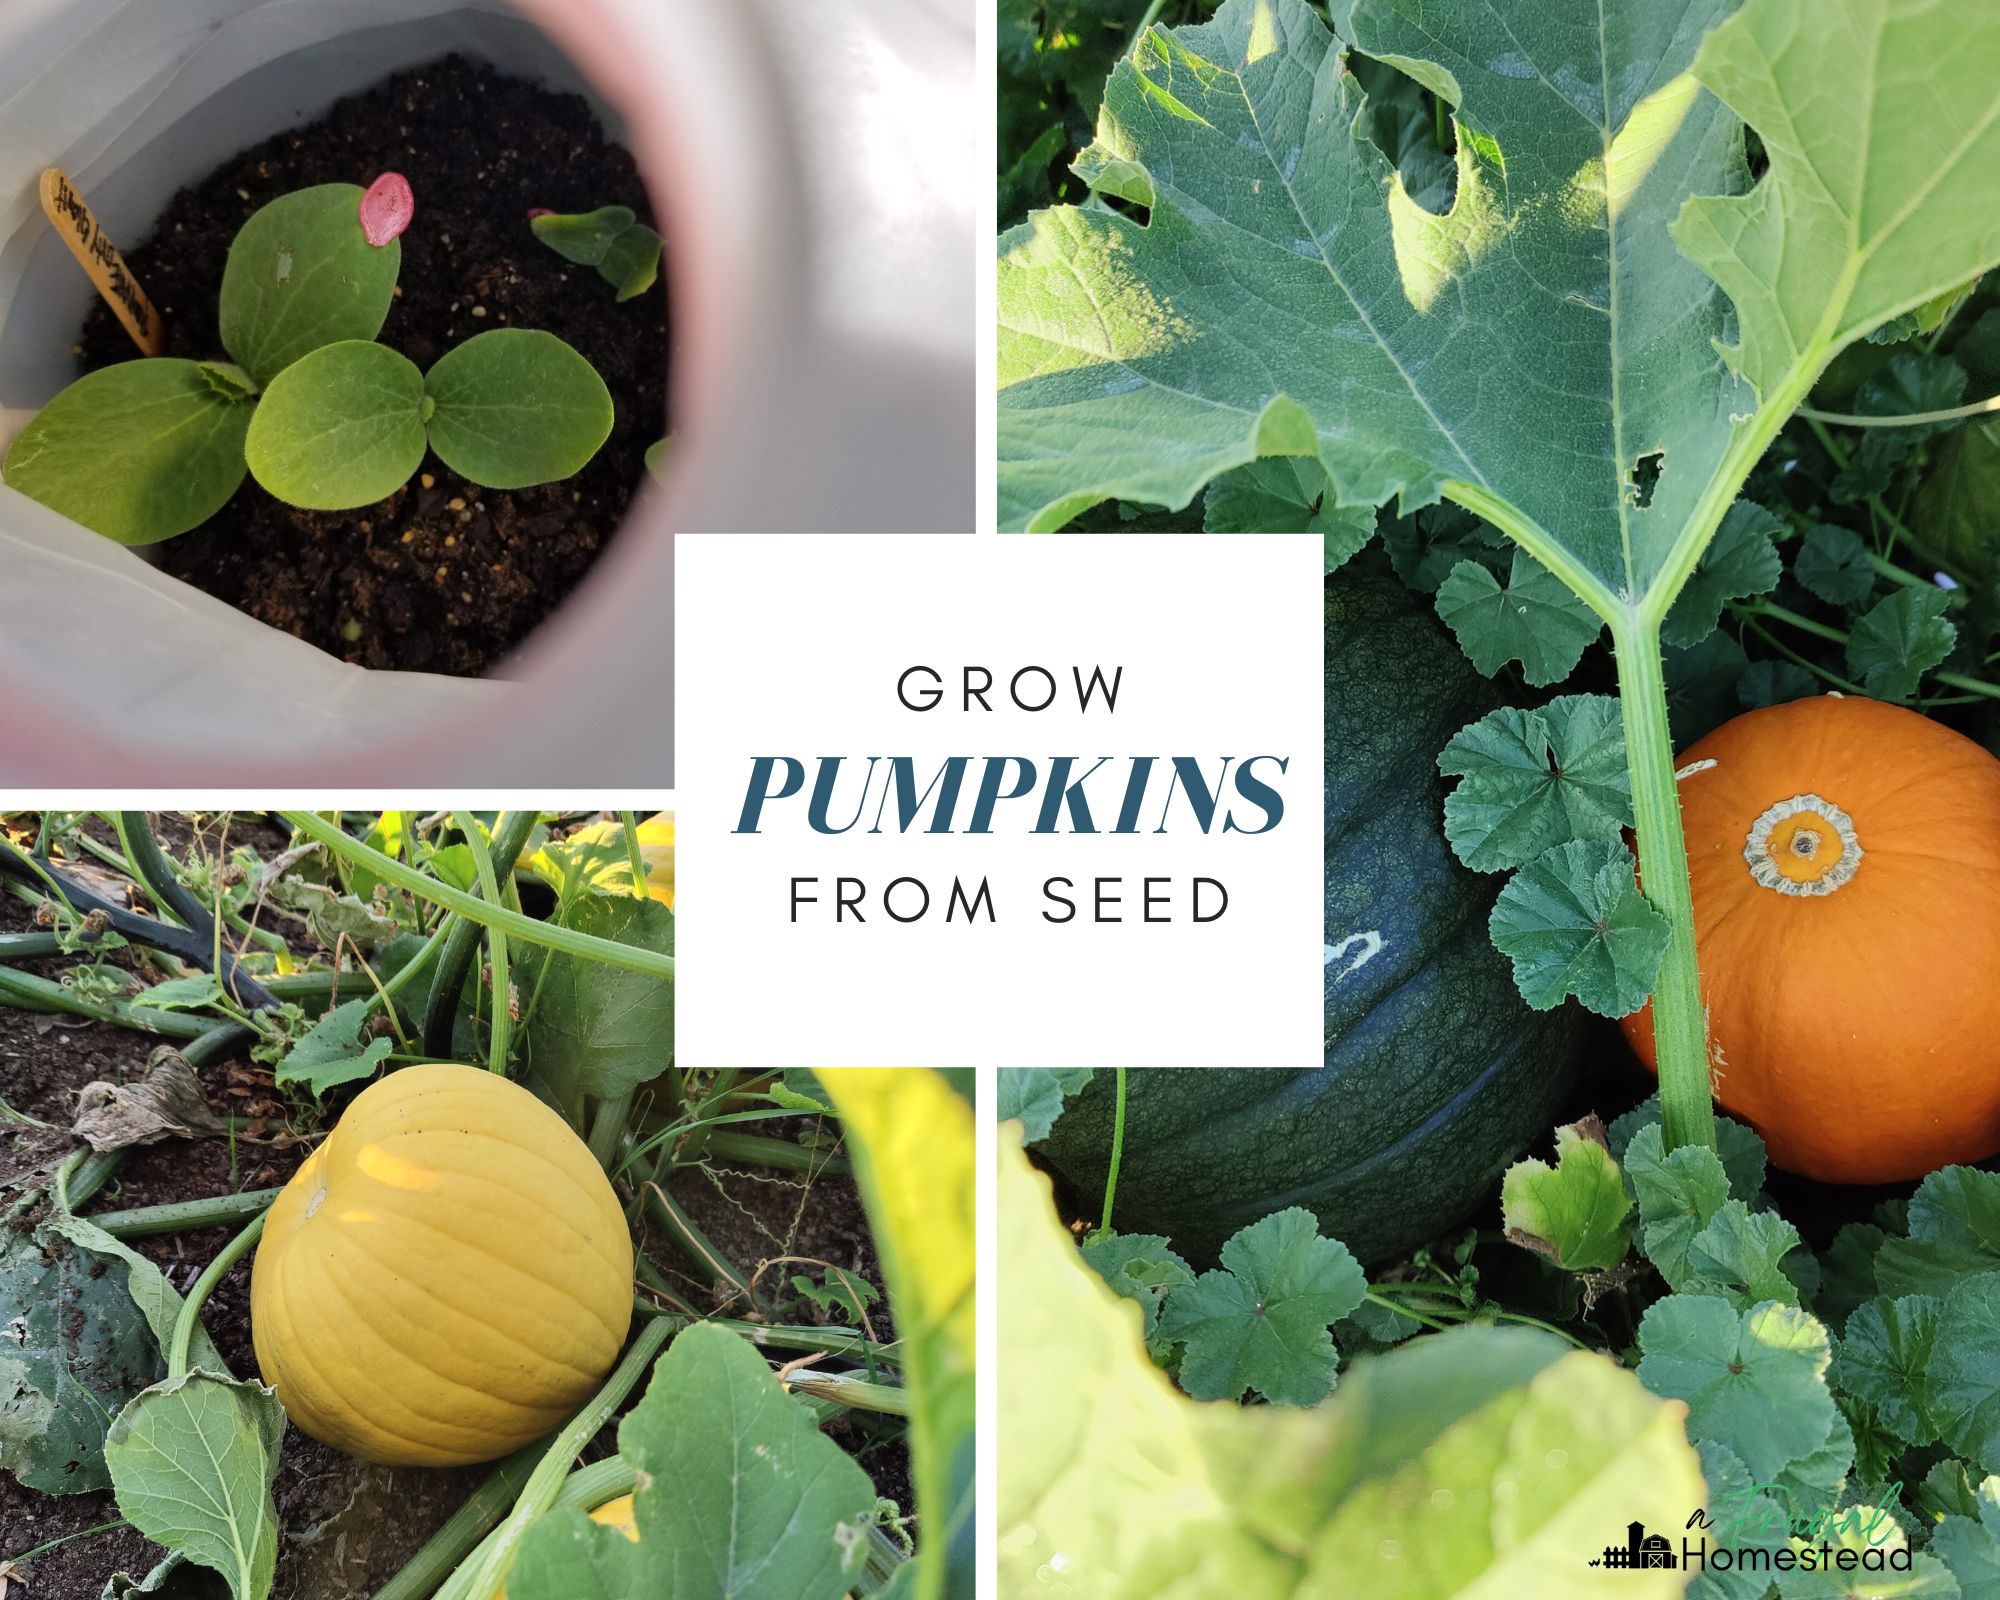 Grow a Pumpkin from Seed – A Step-by-Step Guide